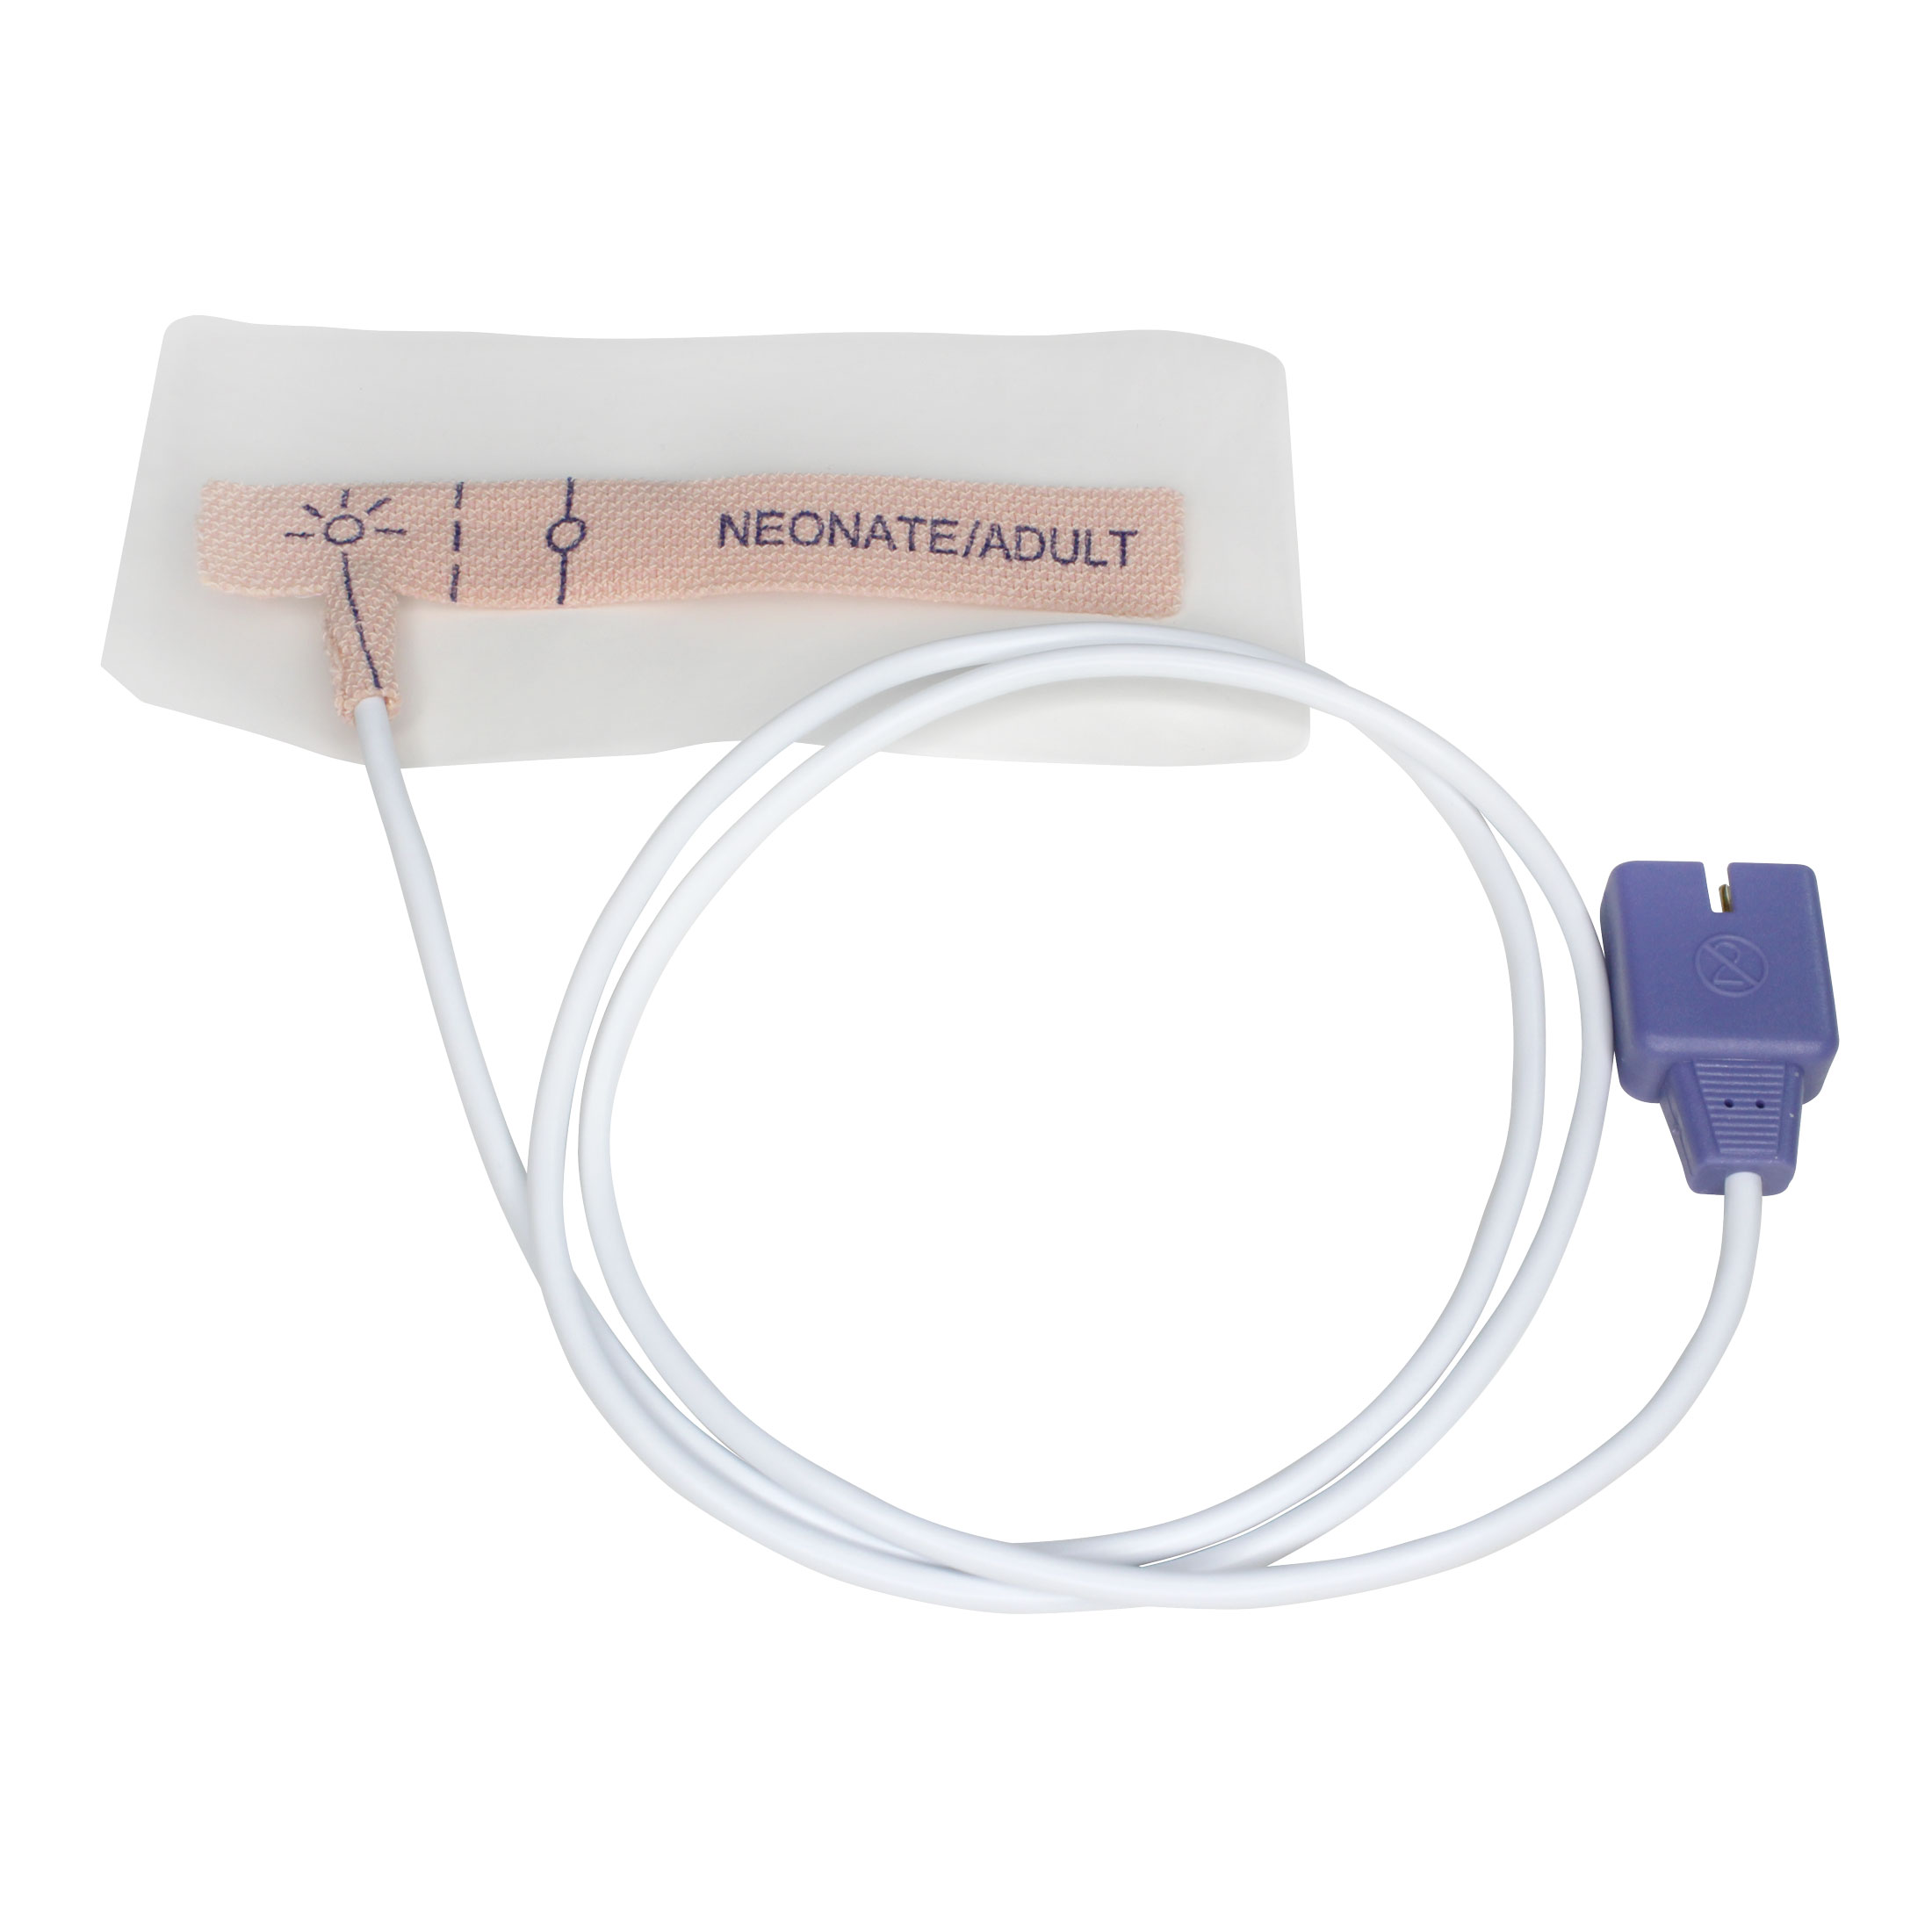 Disposable SpO2 Sensor Neonatal/Adult Comparable to Nellcor MAX-N For use with Nellcor PM100N Monitor